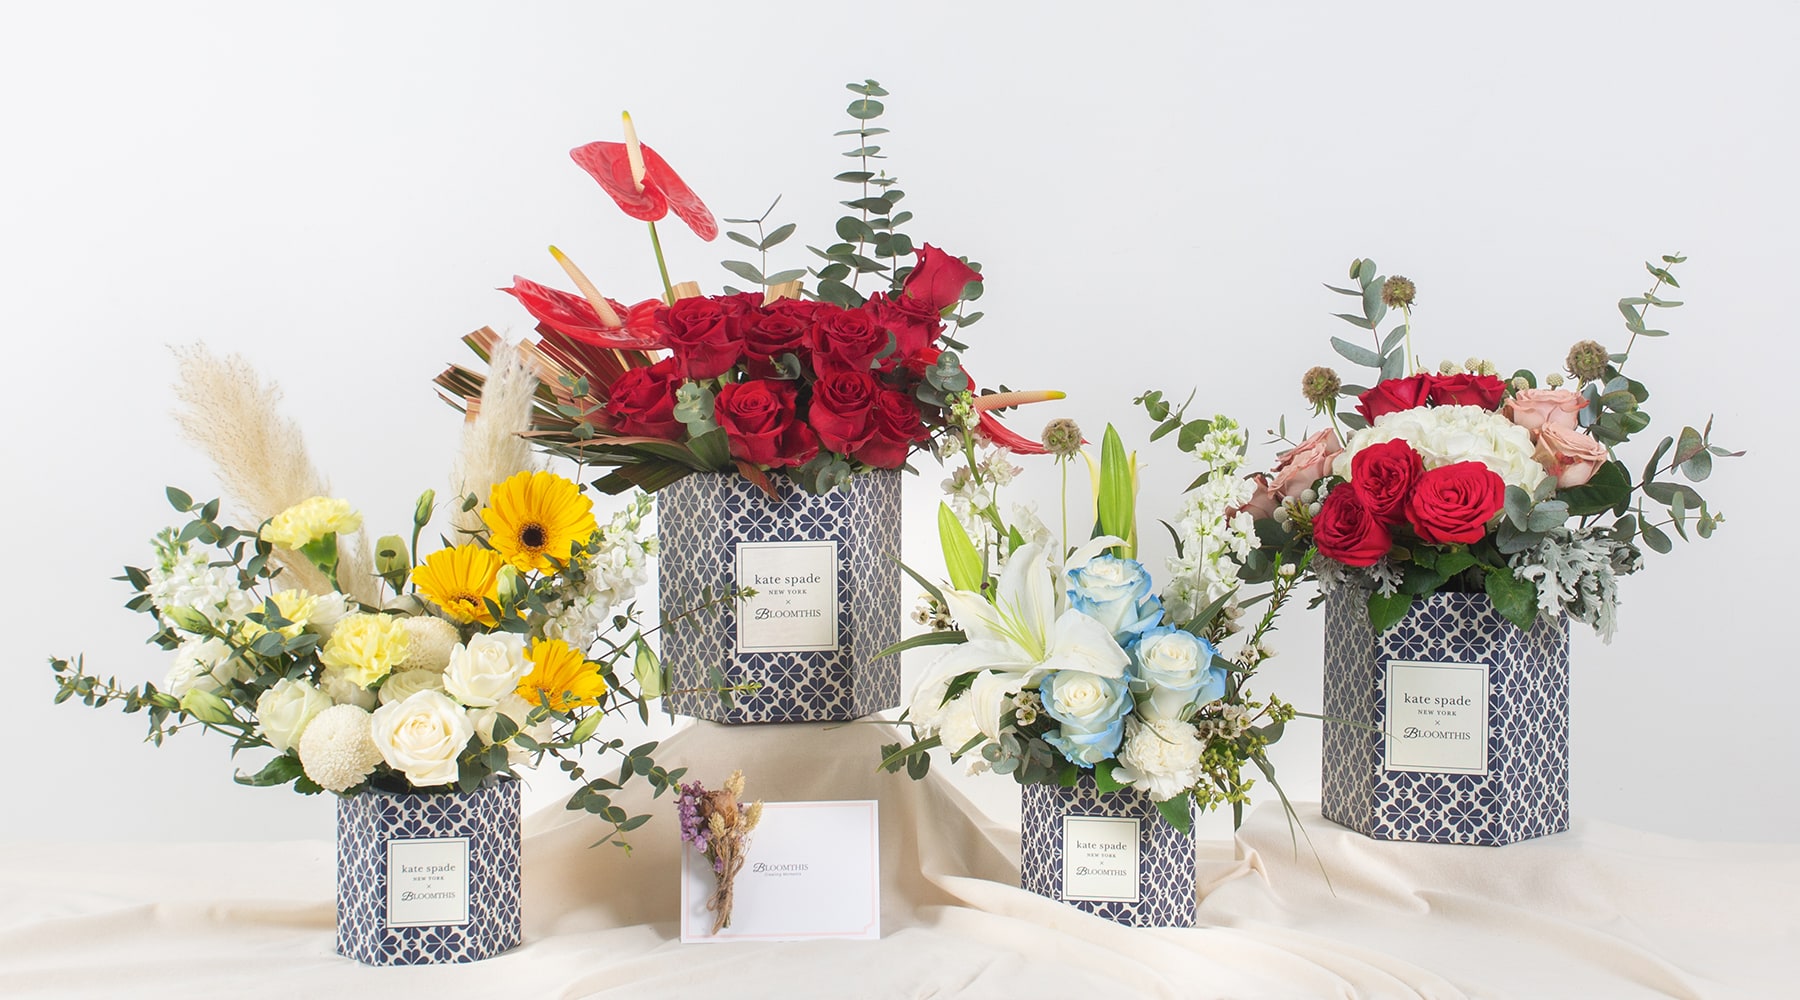 BloomThis Partners With Kate Spade New York To Come Up With Designer Flower Boxes This Mother’s Day